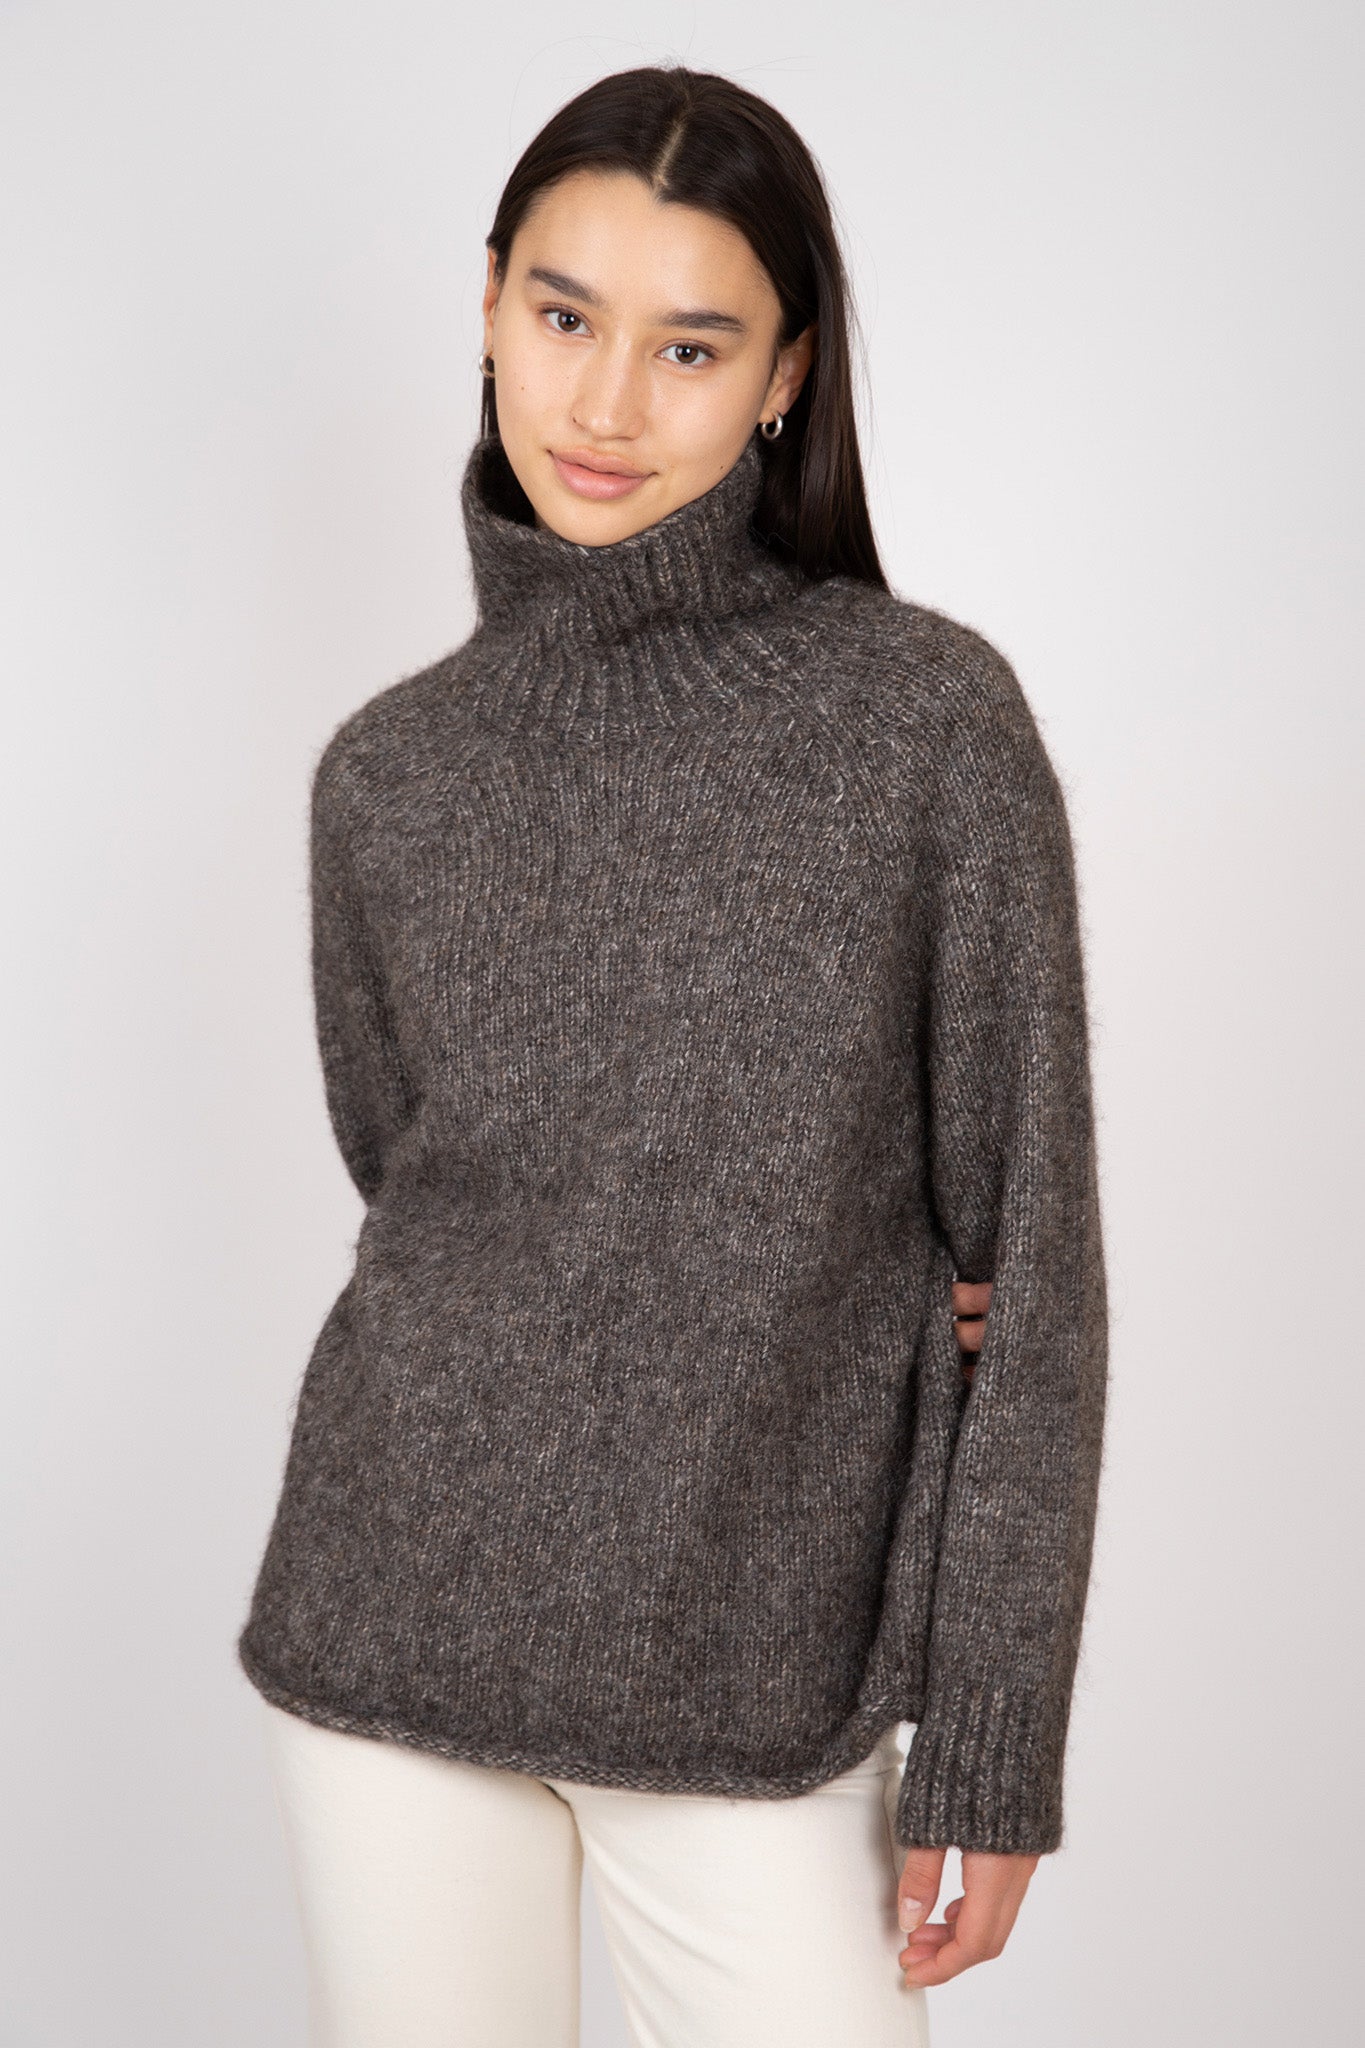    Bare-Knitwear-Stanley-Pullover-Earth